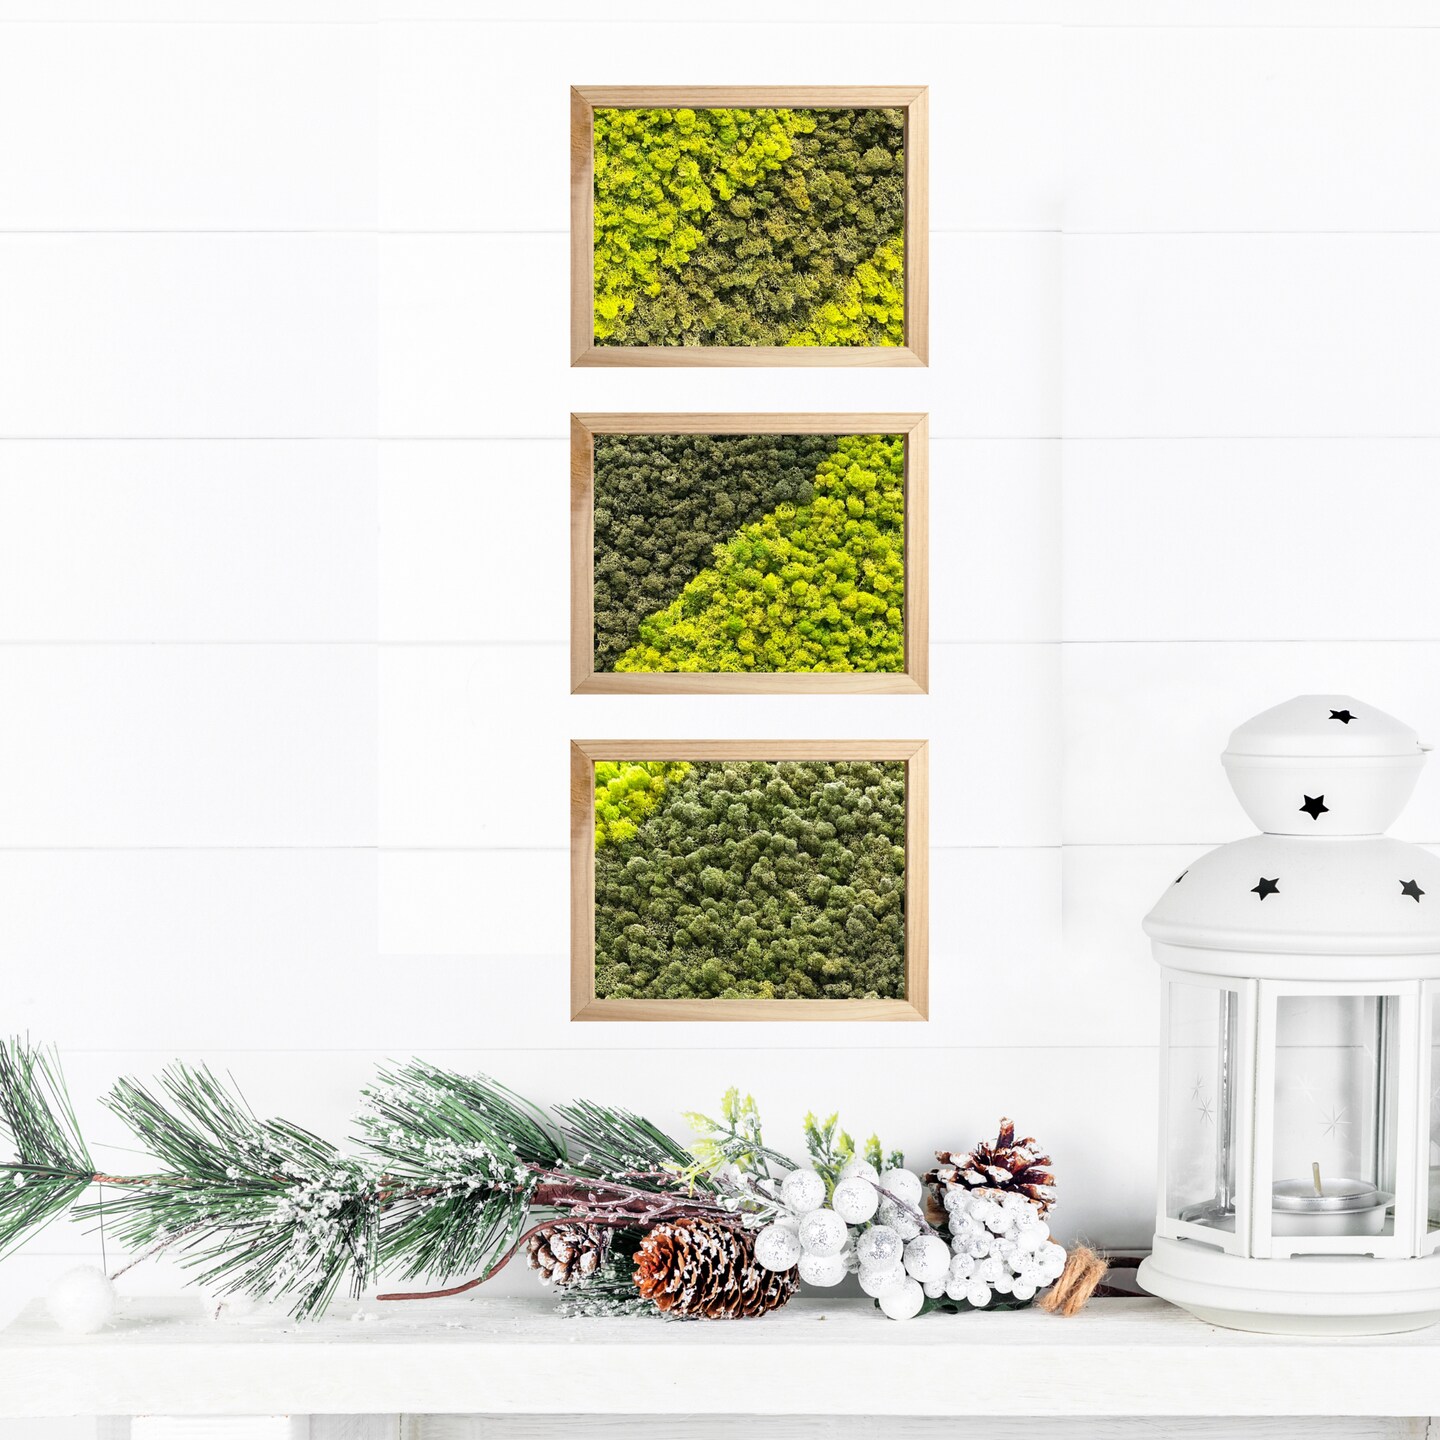 Small moss art gift, Miniature moss decor, Tiny moss wall art, Botanical  gift, frame nature-inspired, idea for nature and plant enthusiasts